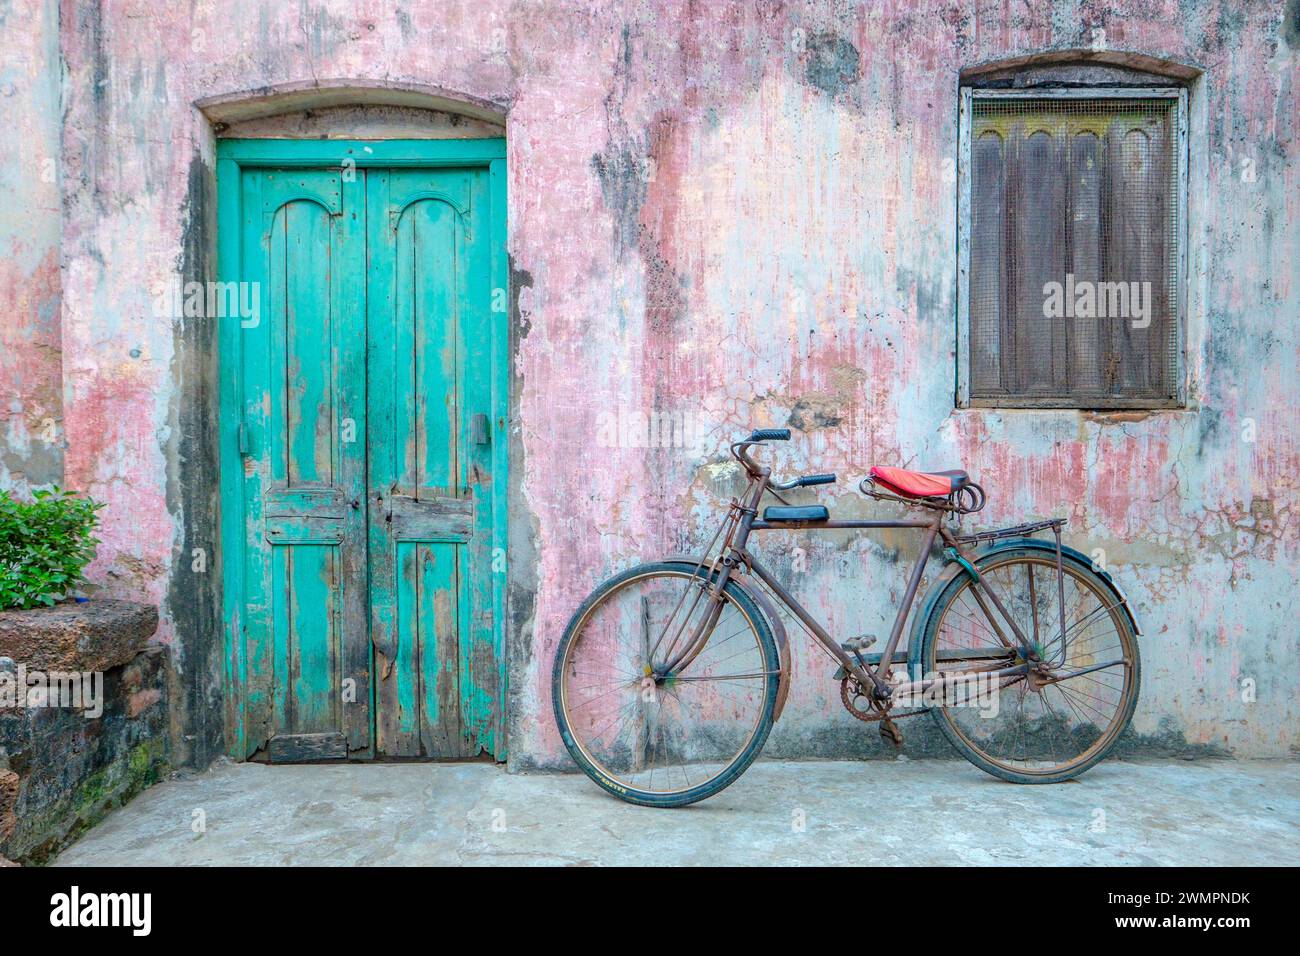 A bicycle propped up outside a colourful entrance to an Indian house Stock Photo